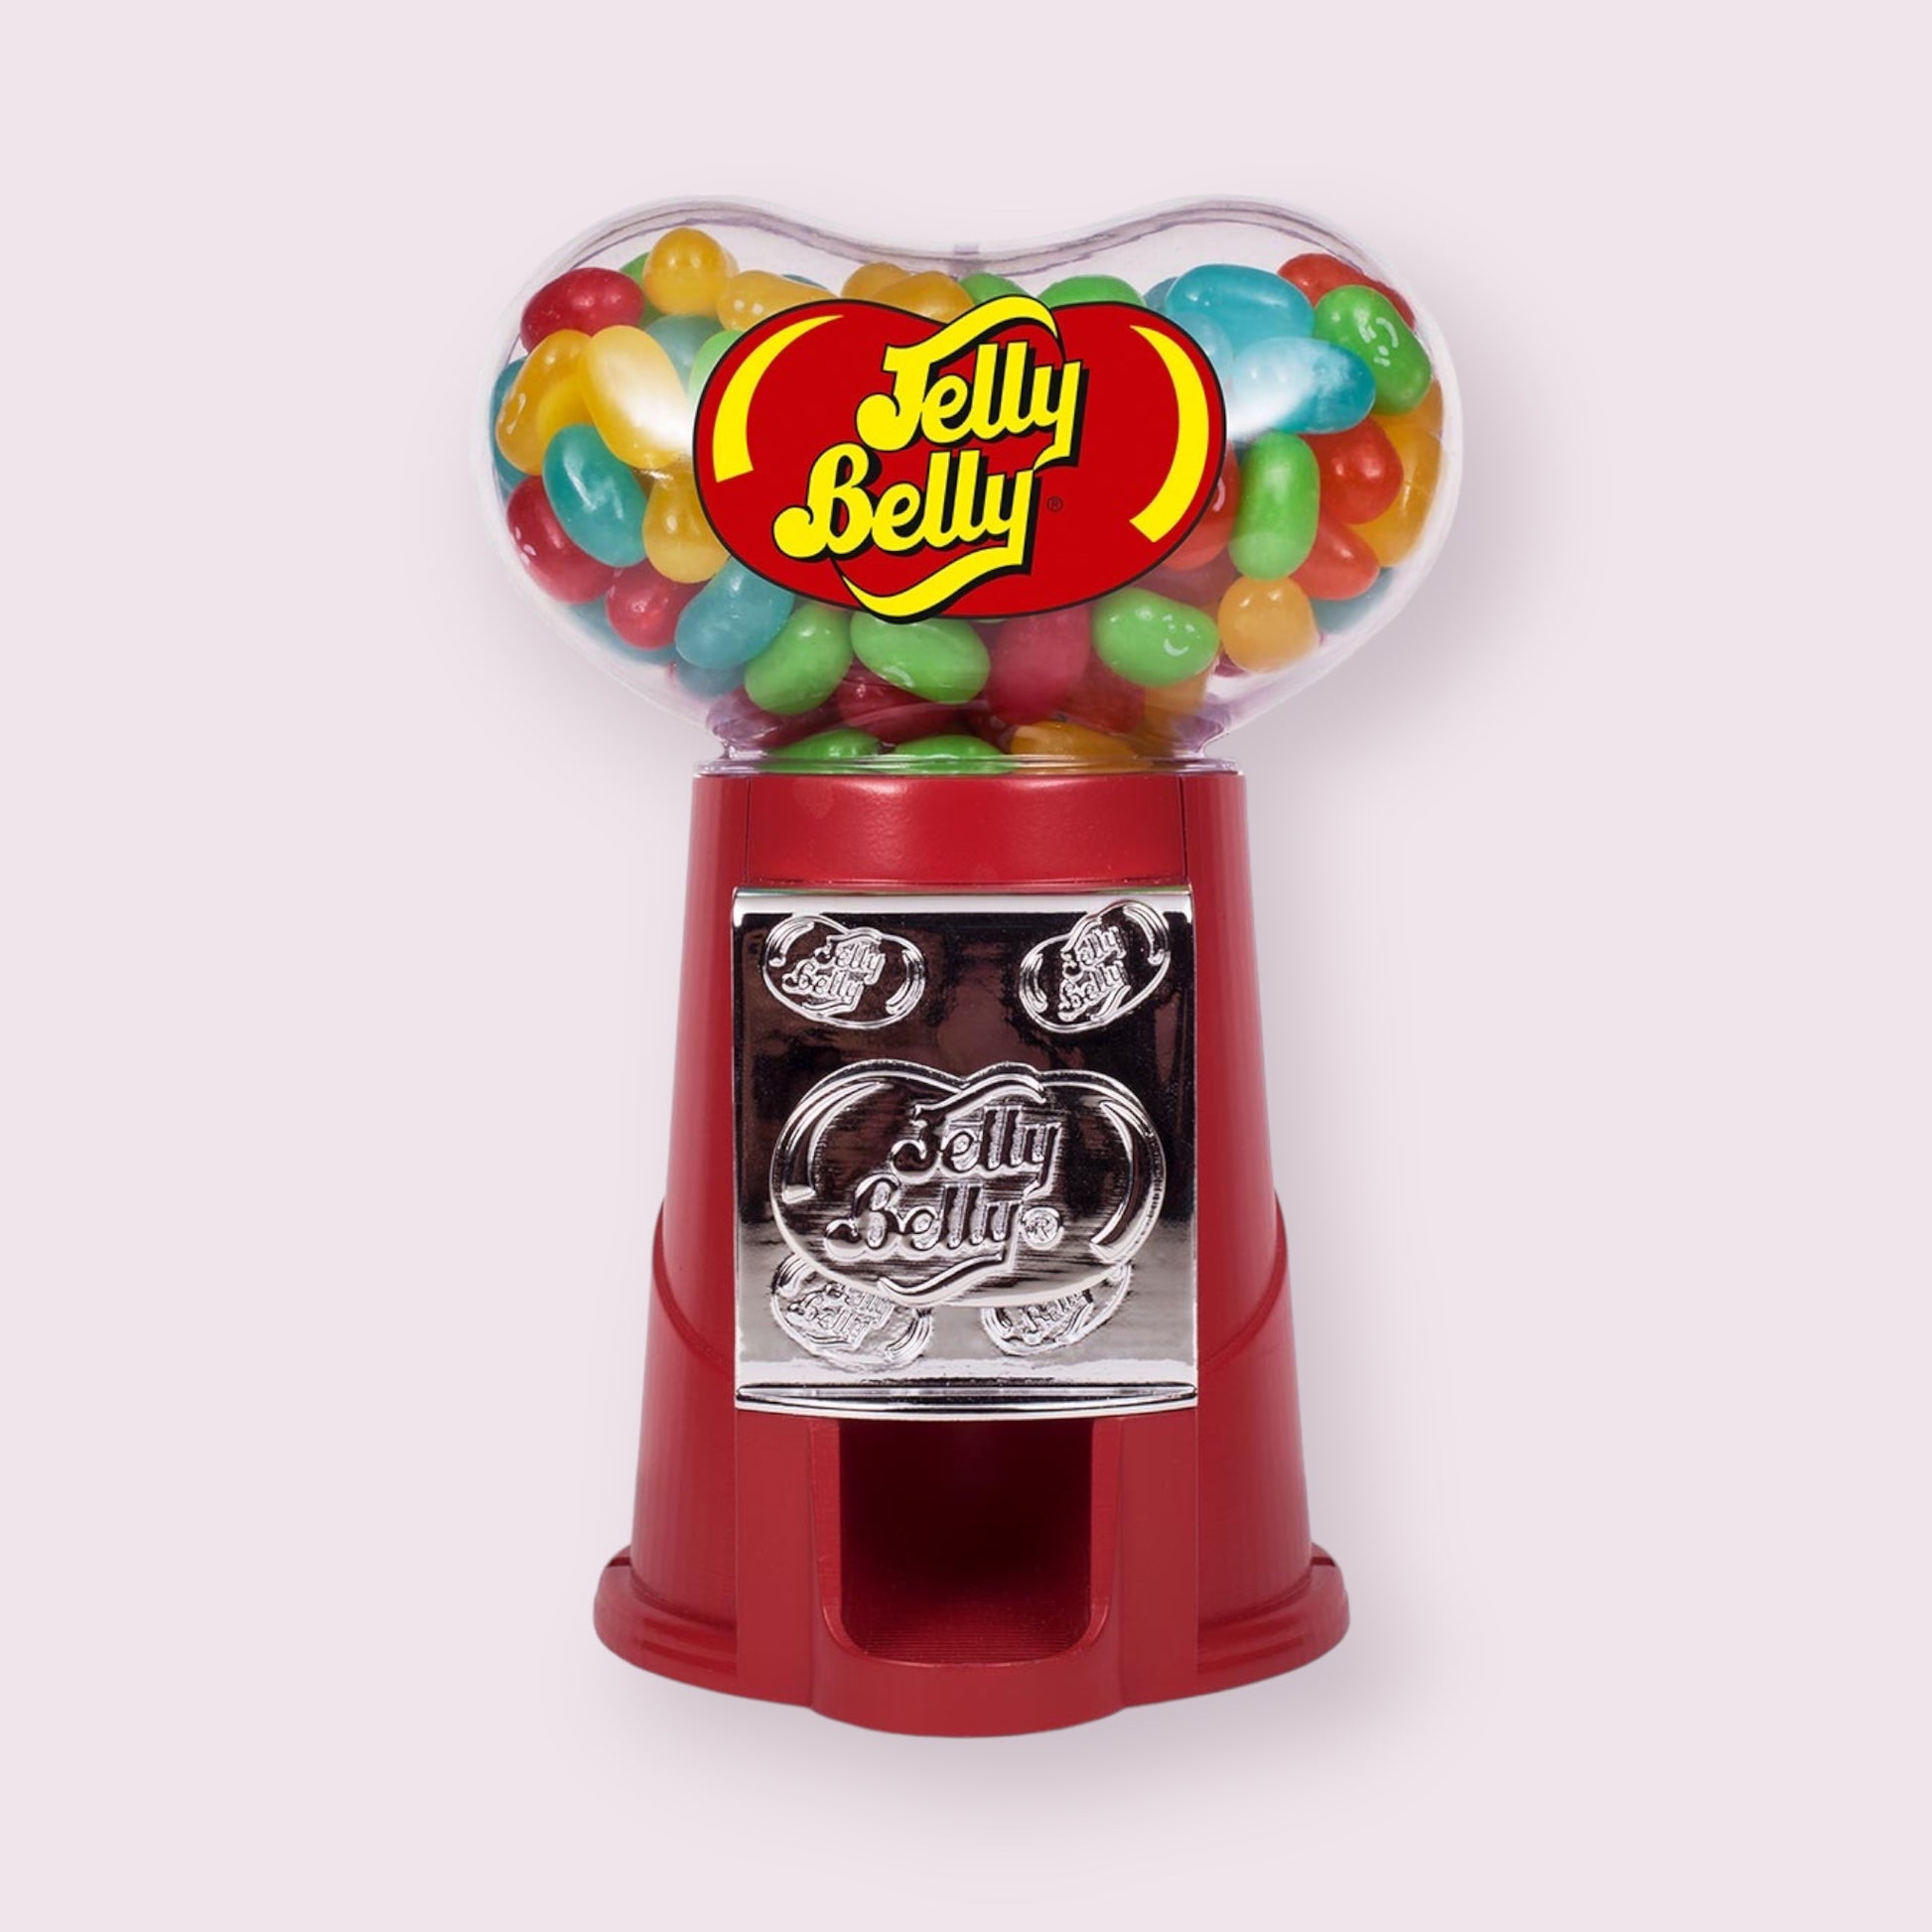 Jelly Belly Bean Machine  Pixie Candy Shoppe   